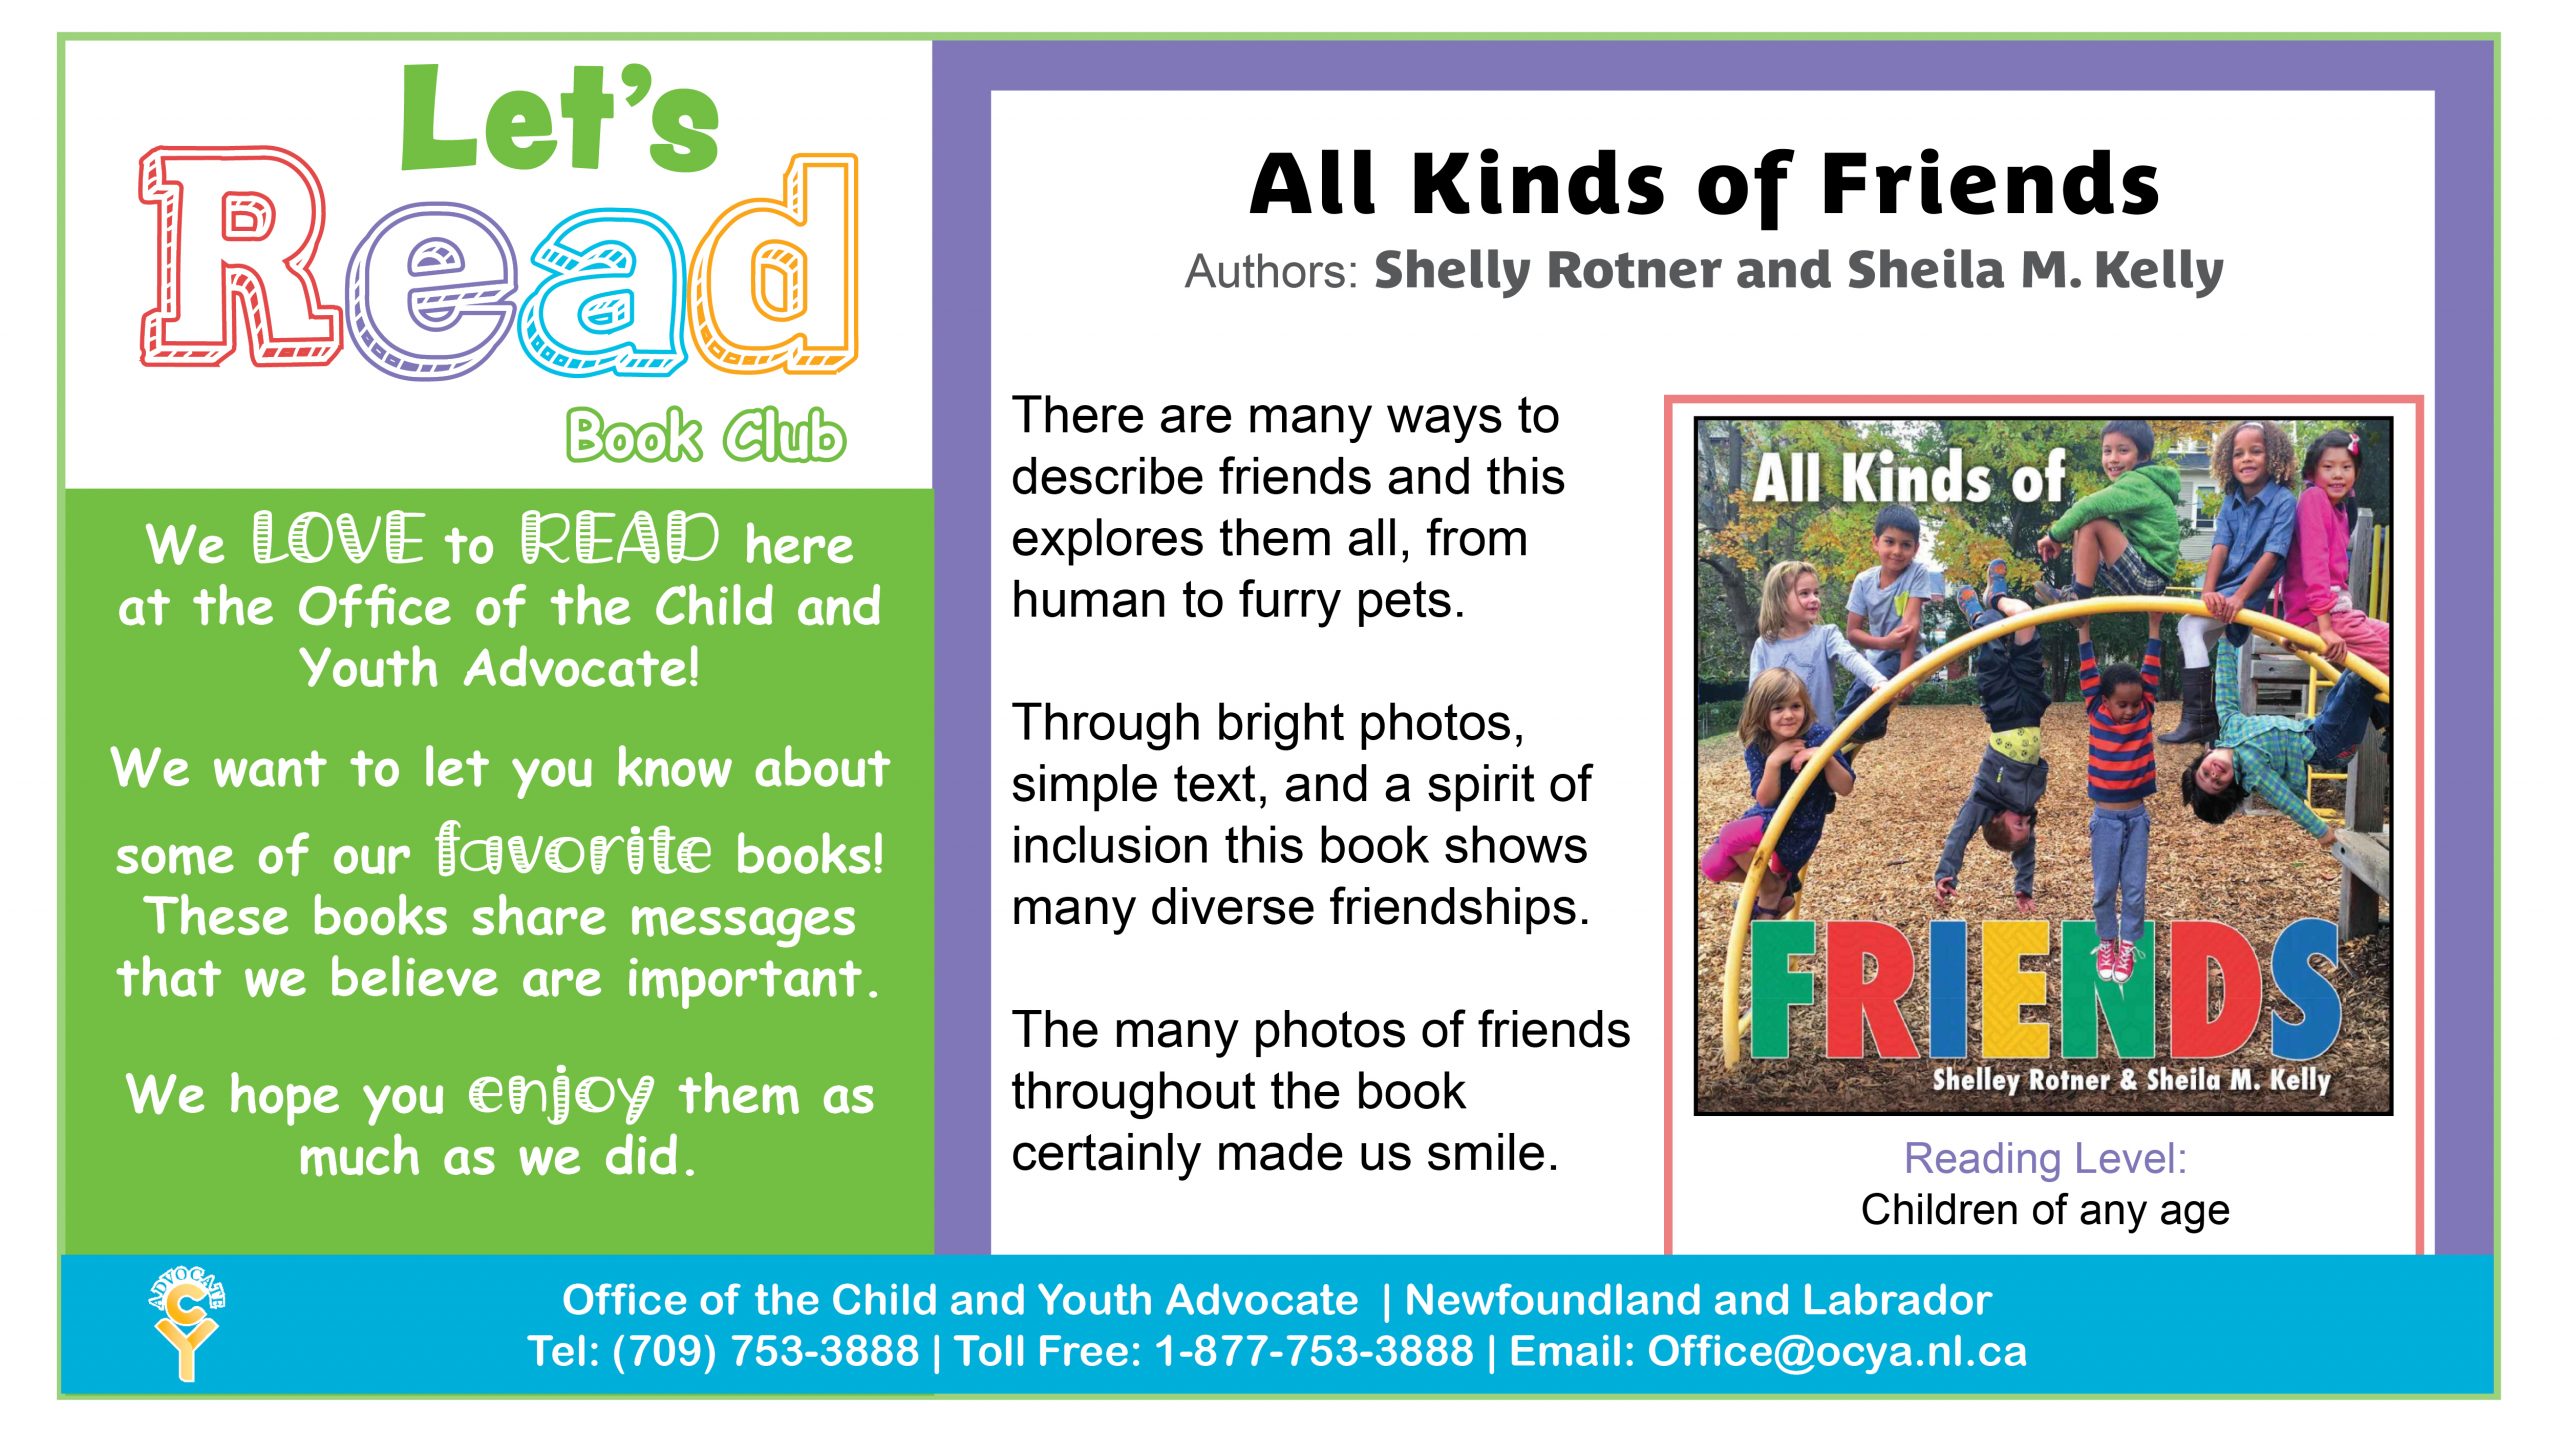 All Kinds of Friends, by Shelly Rotner and Sheila M. Kelly. There are many ways to describe friends and this explores them all, from human to furry pets. Through bright photos, simple text, and a spirit of inclusion this book shows many diverse friendships. The many photos of friends throughout the book made us smile.